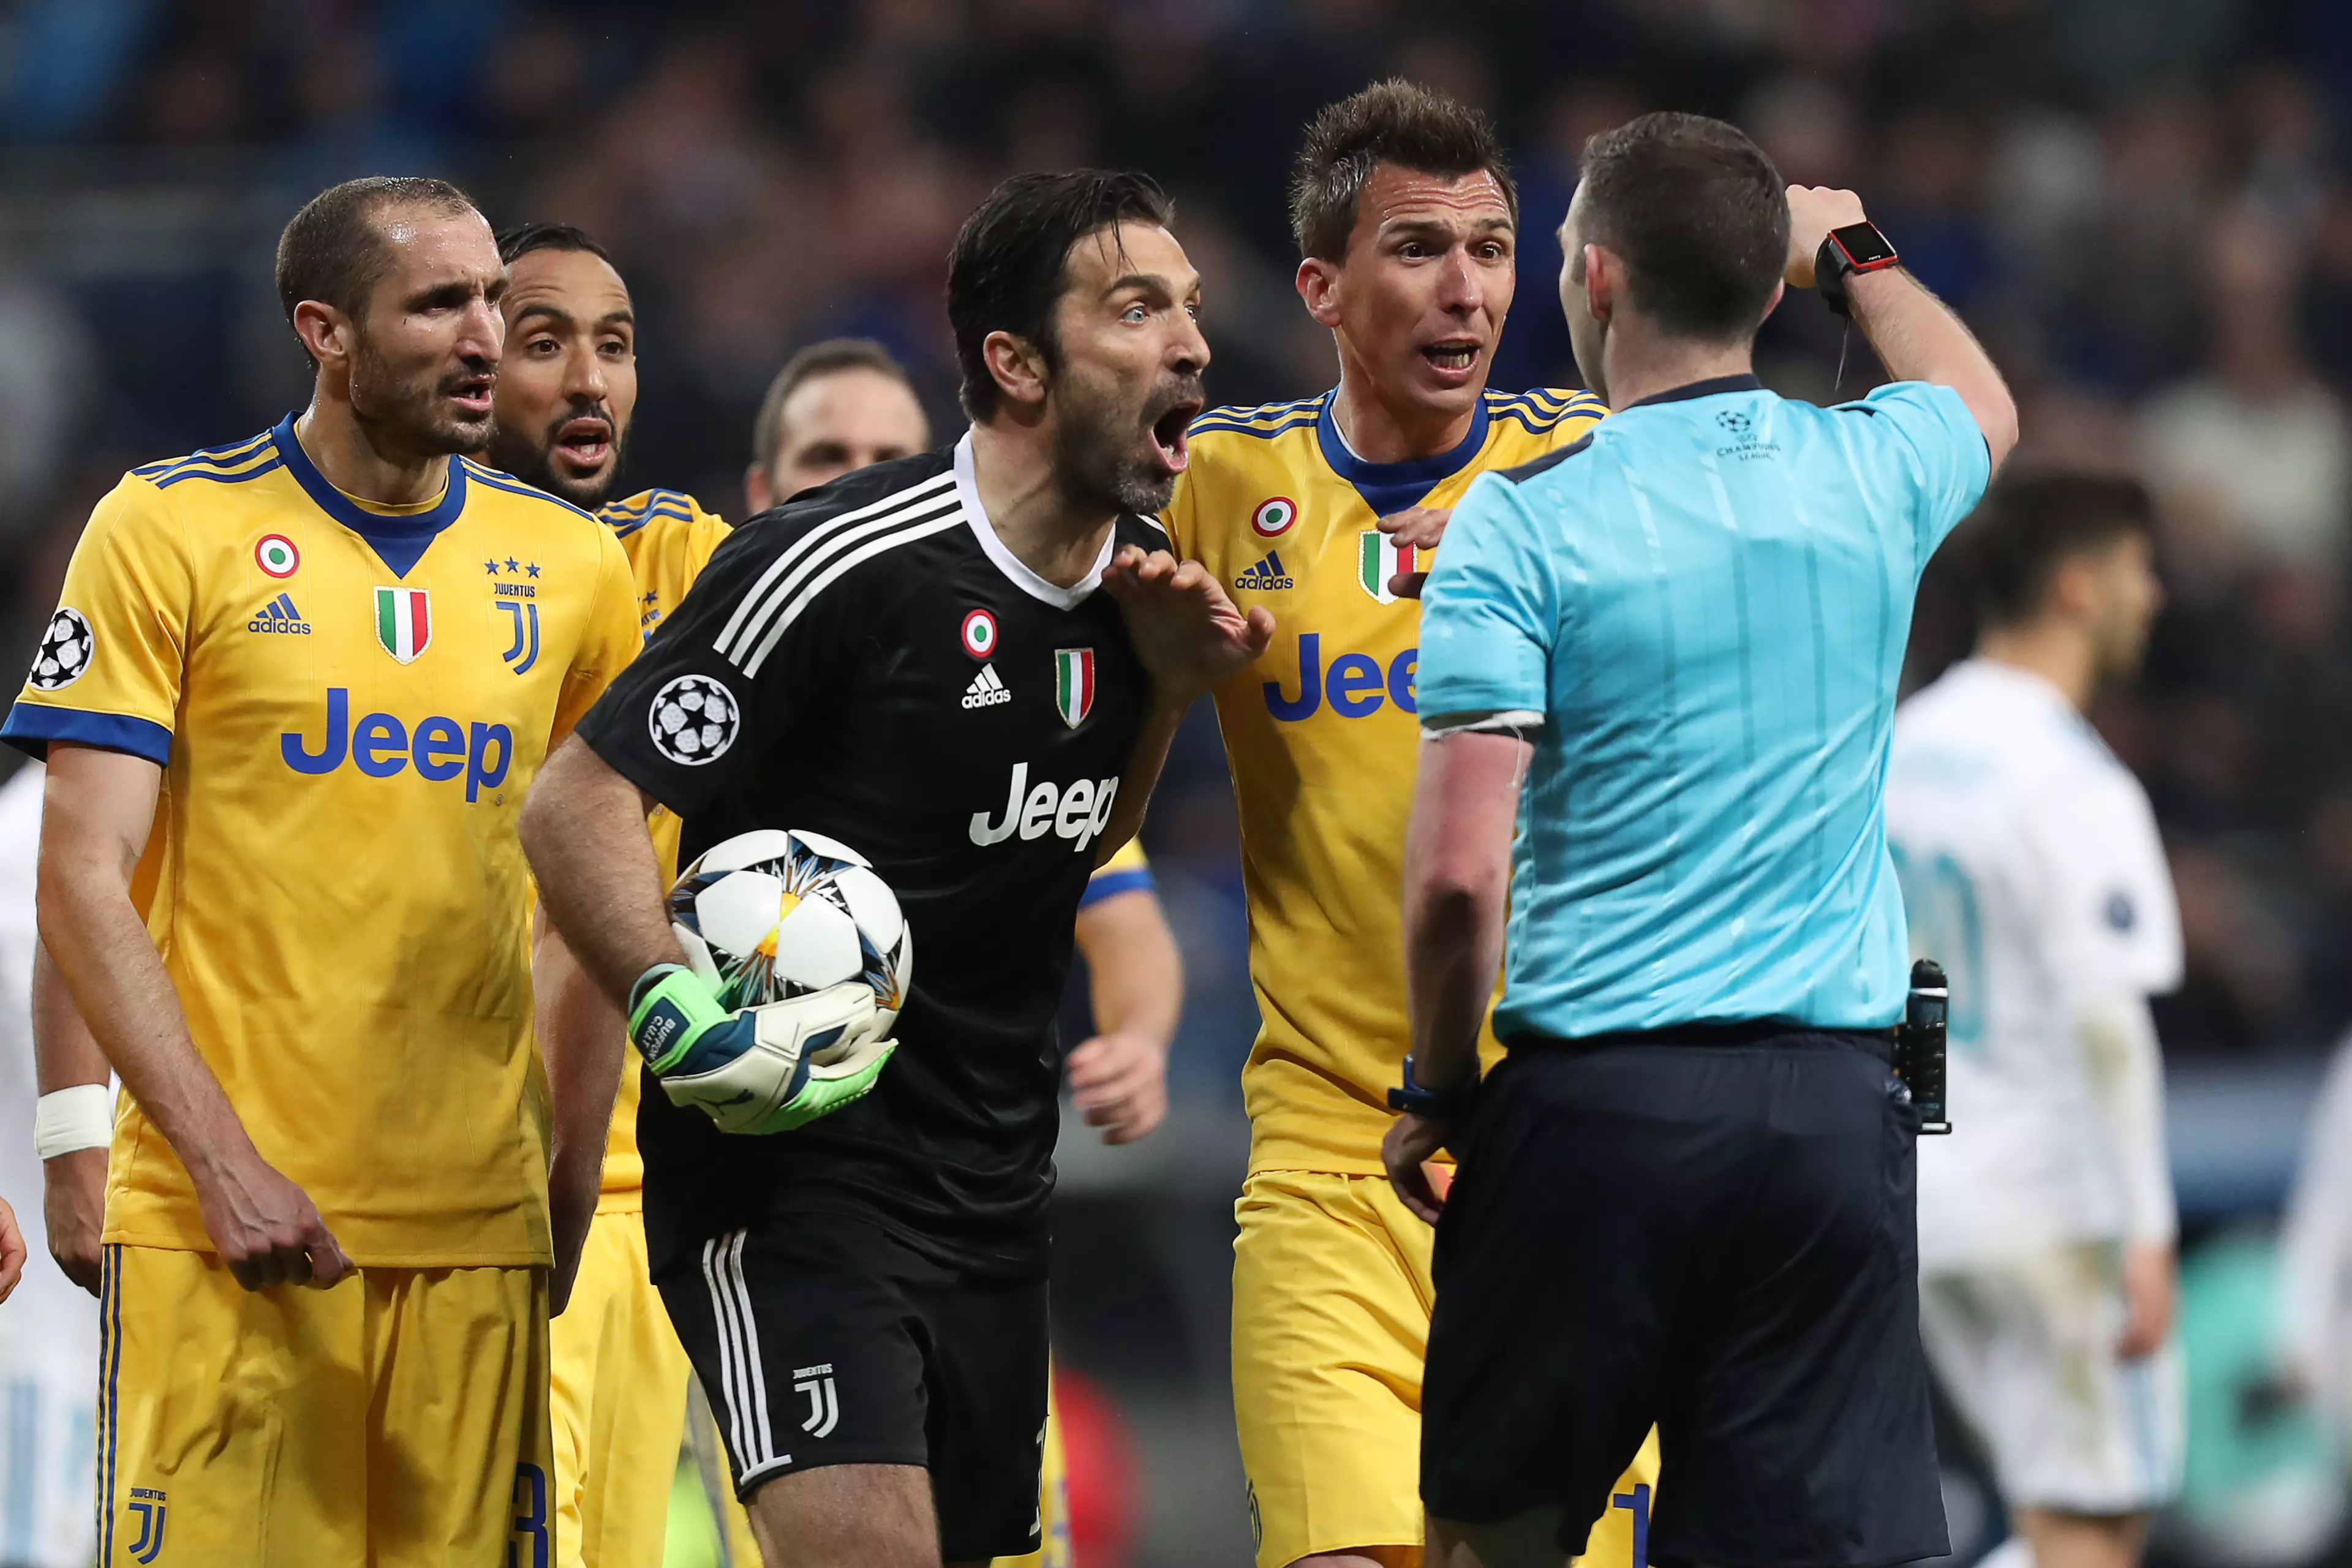 Buffon's last chance at Champions League glory goes up in flames. Image: PA Images